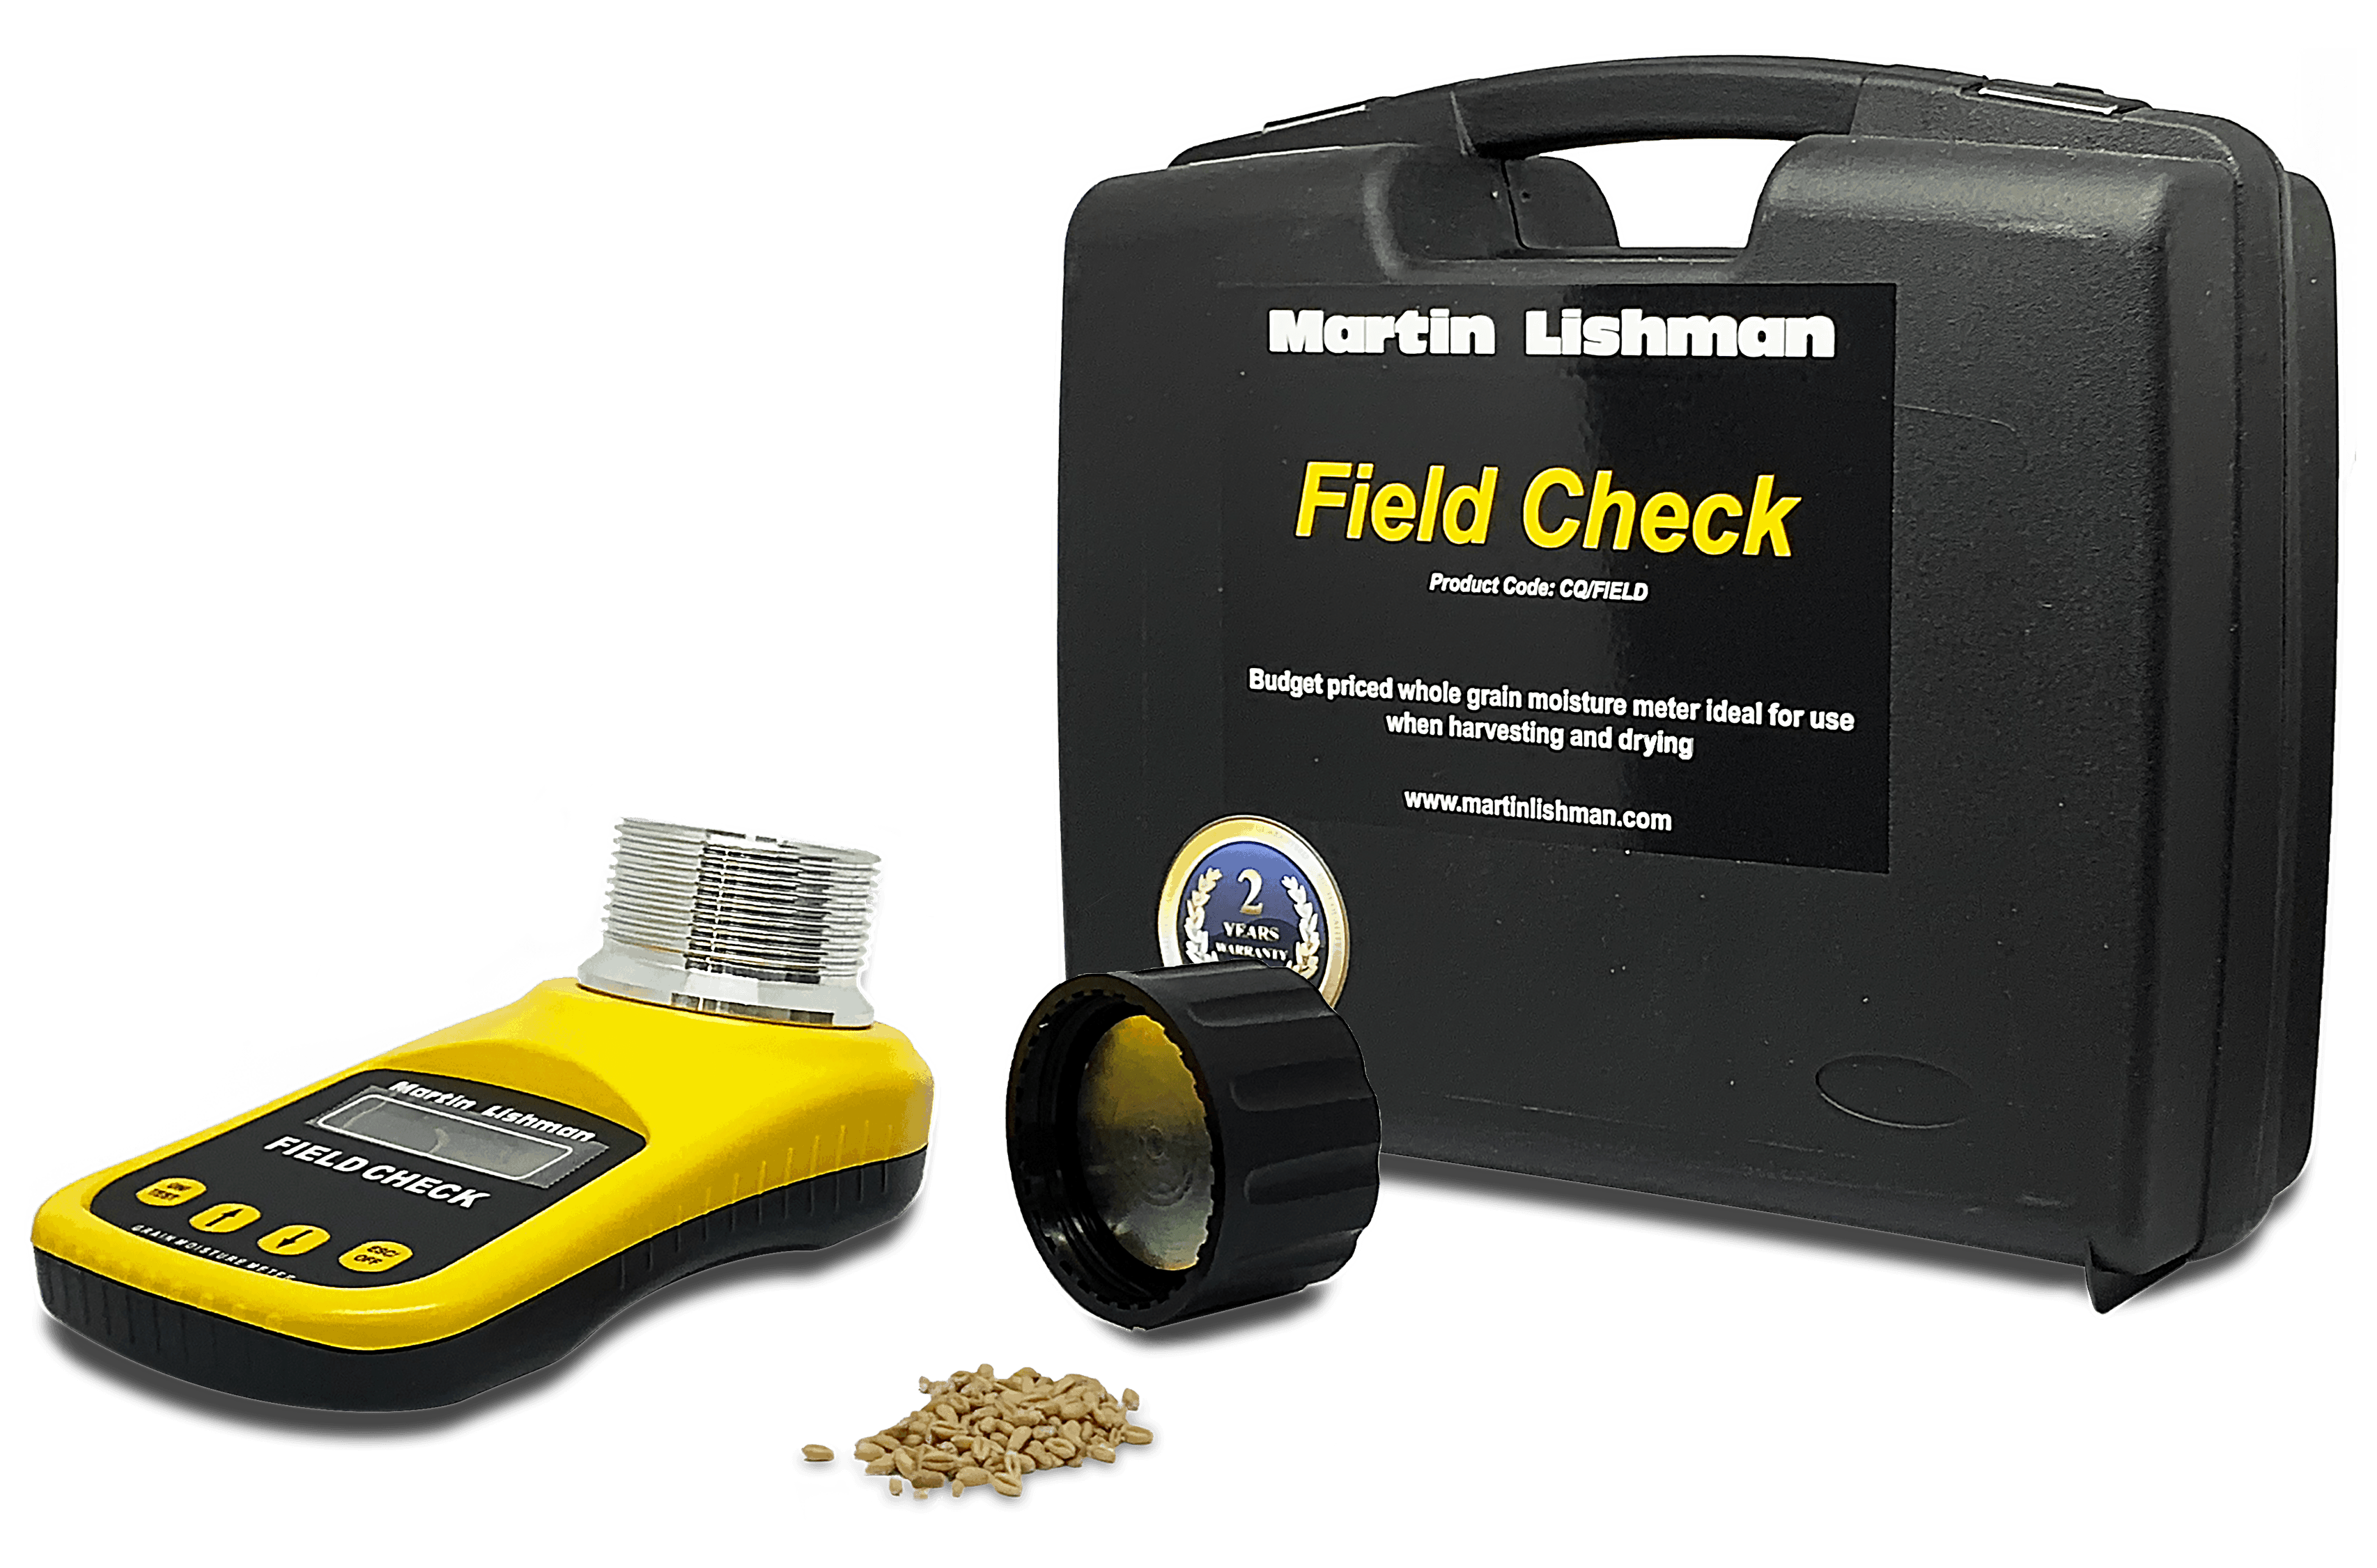 Martin Lishman field check moisture meter is ideal to leave in the combine for quick testing